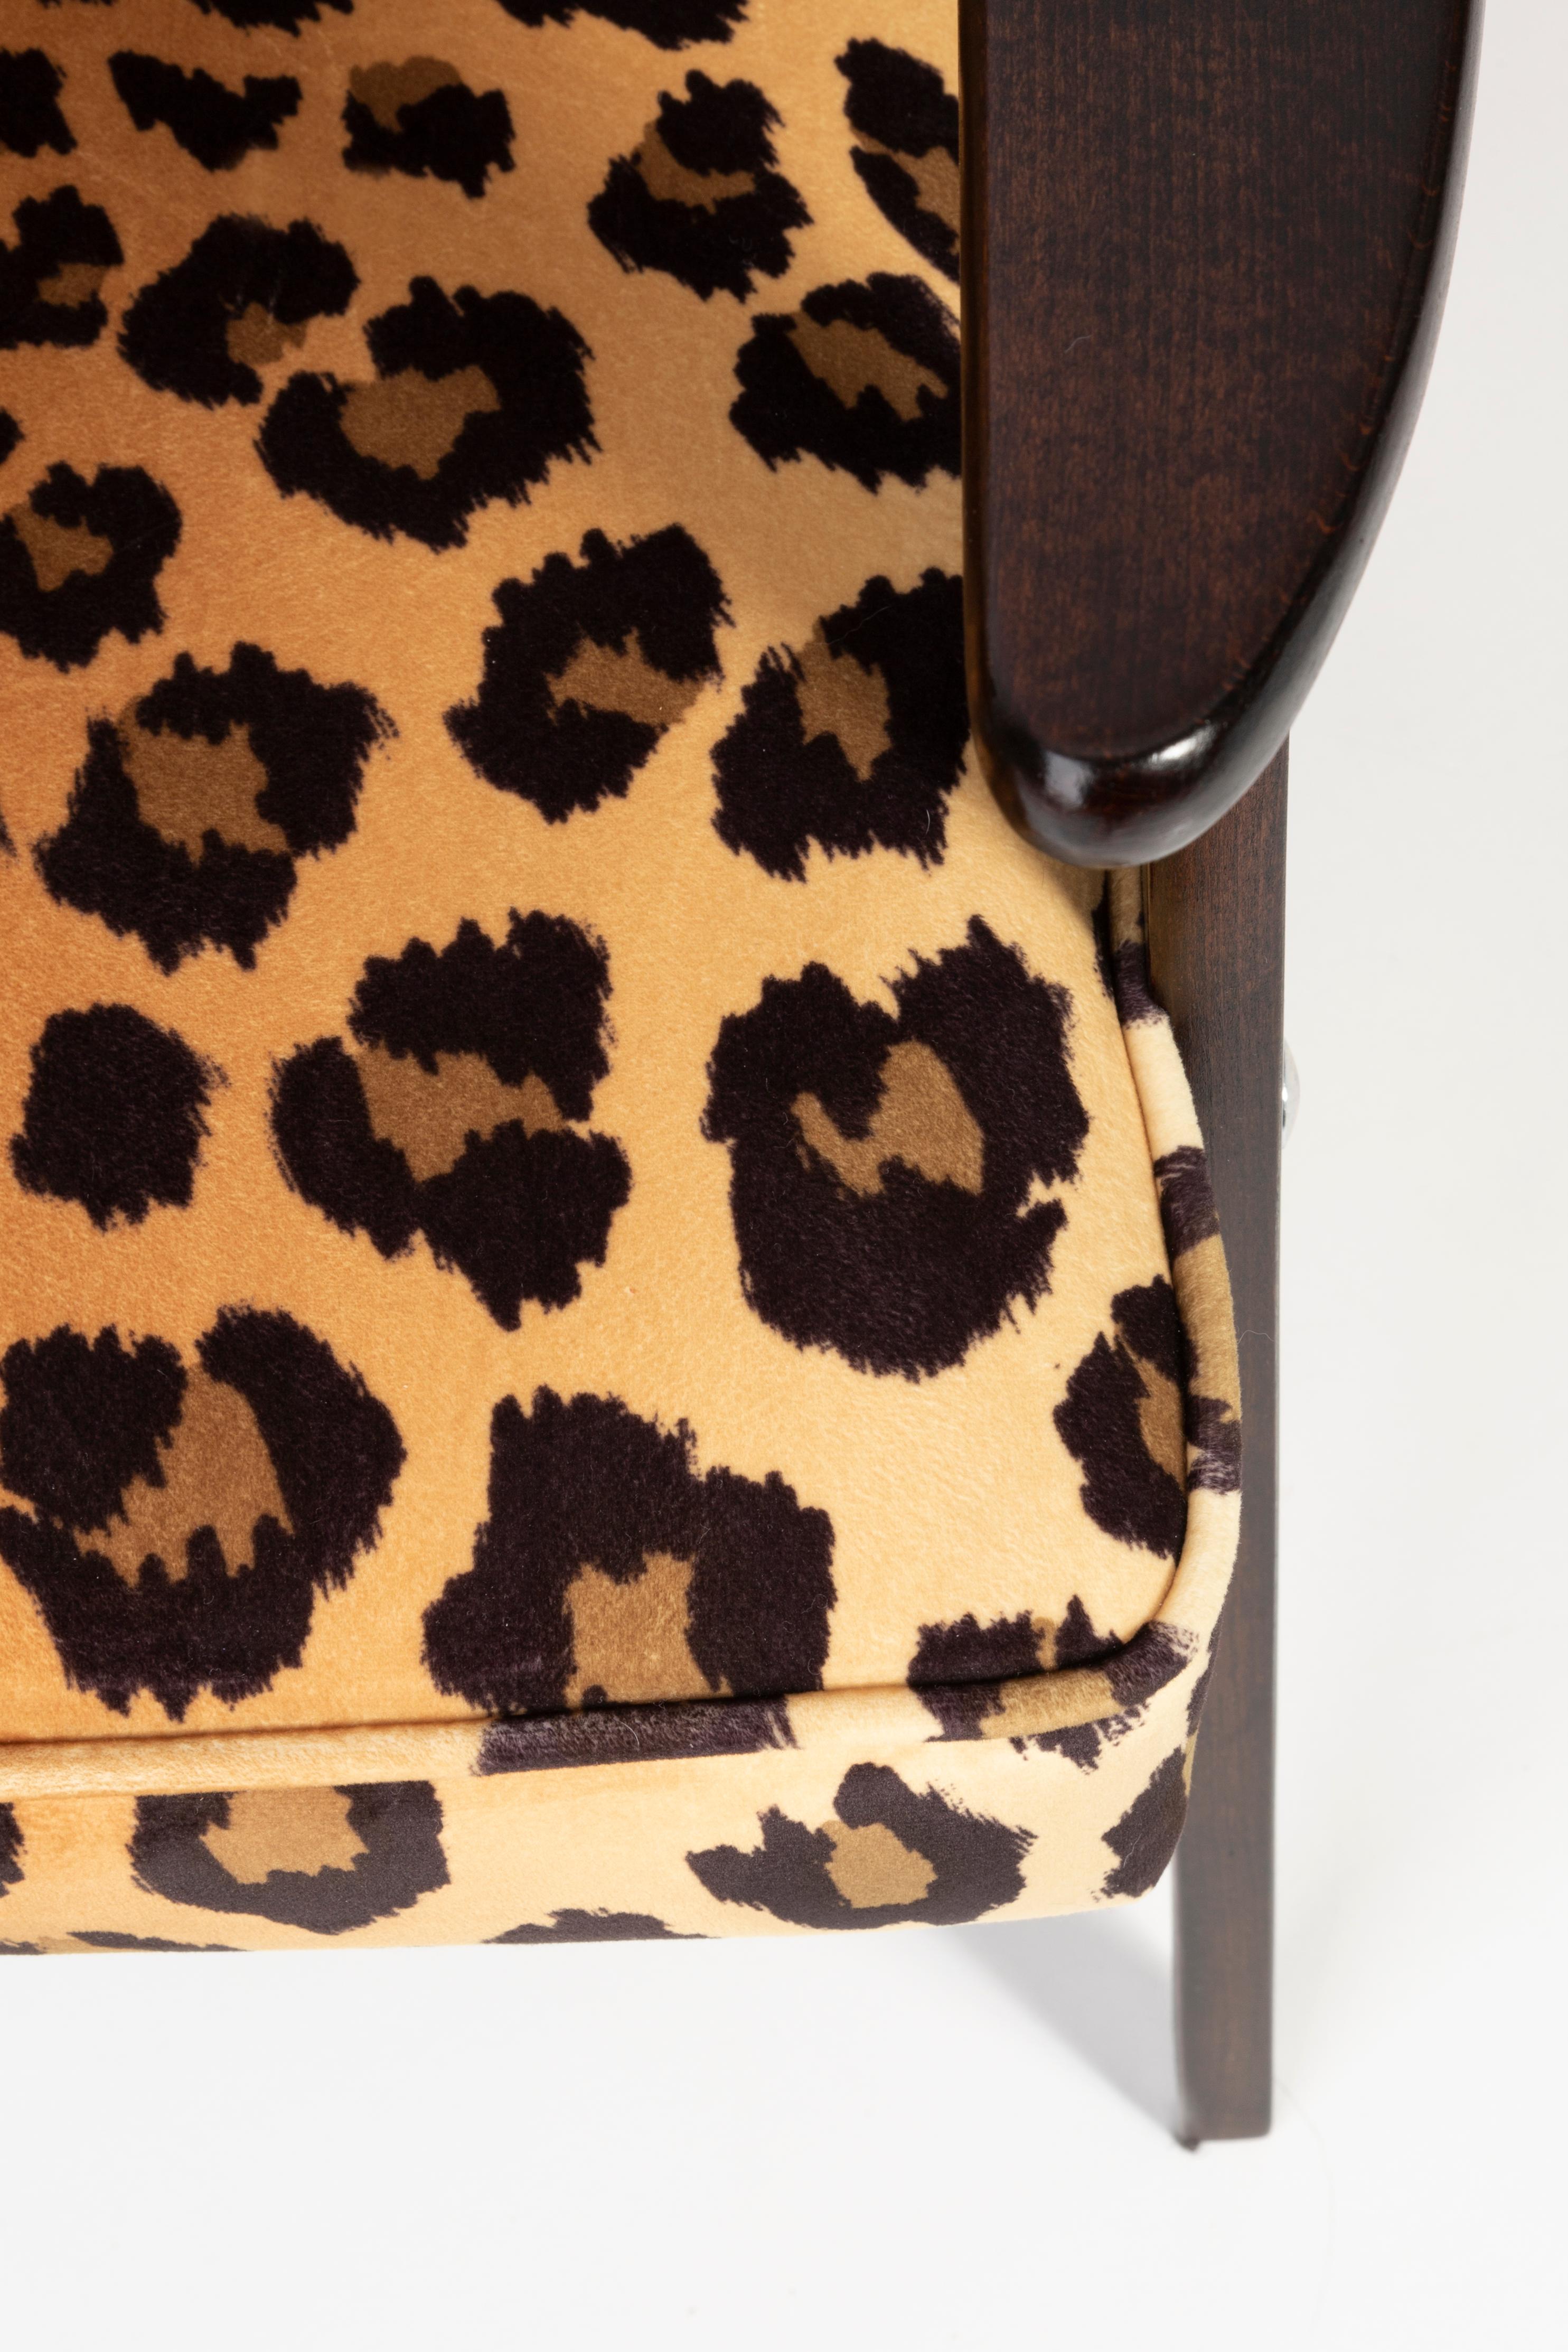 Eight Midcentury 366 Armchairs in Leopard Print Velvet, Jozef Chierowski, 1960s For Sale 3